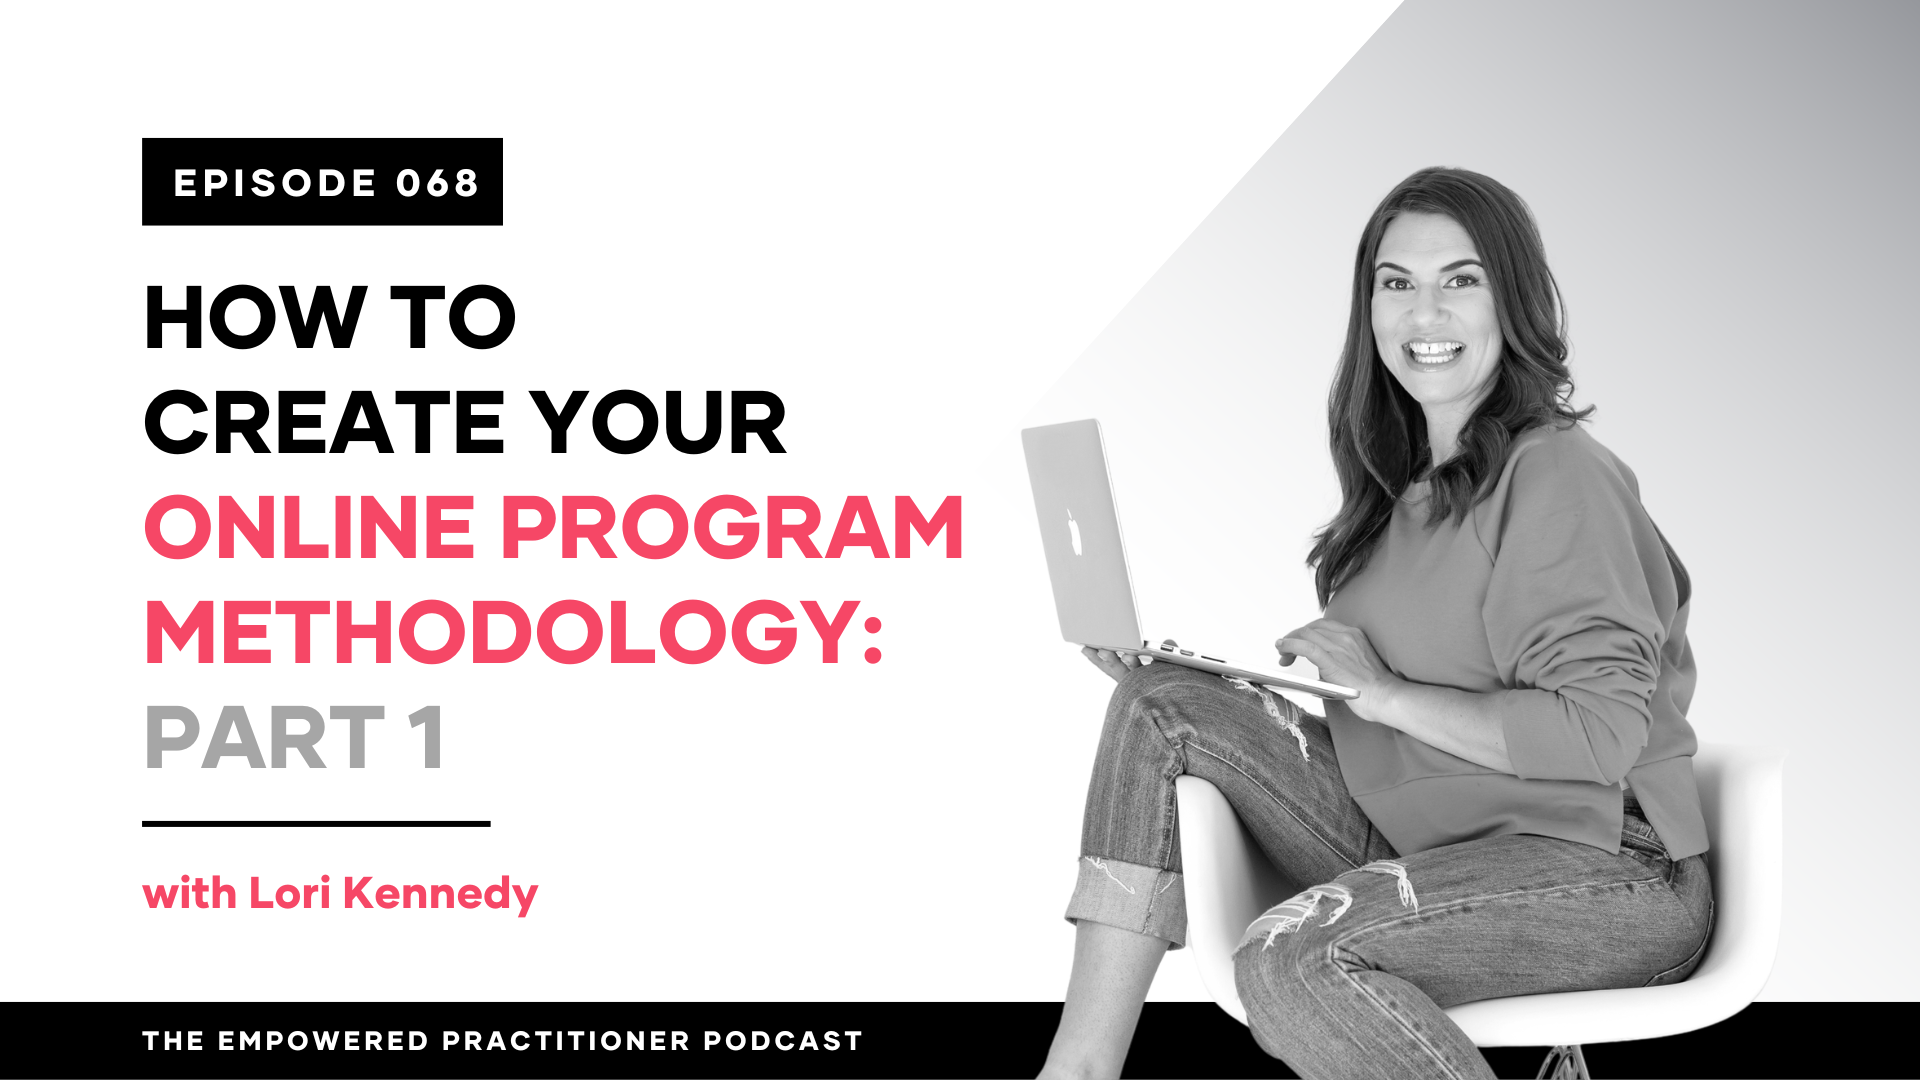 Part 1: How To Create Your Online Program Methodology